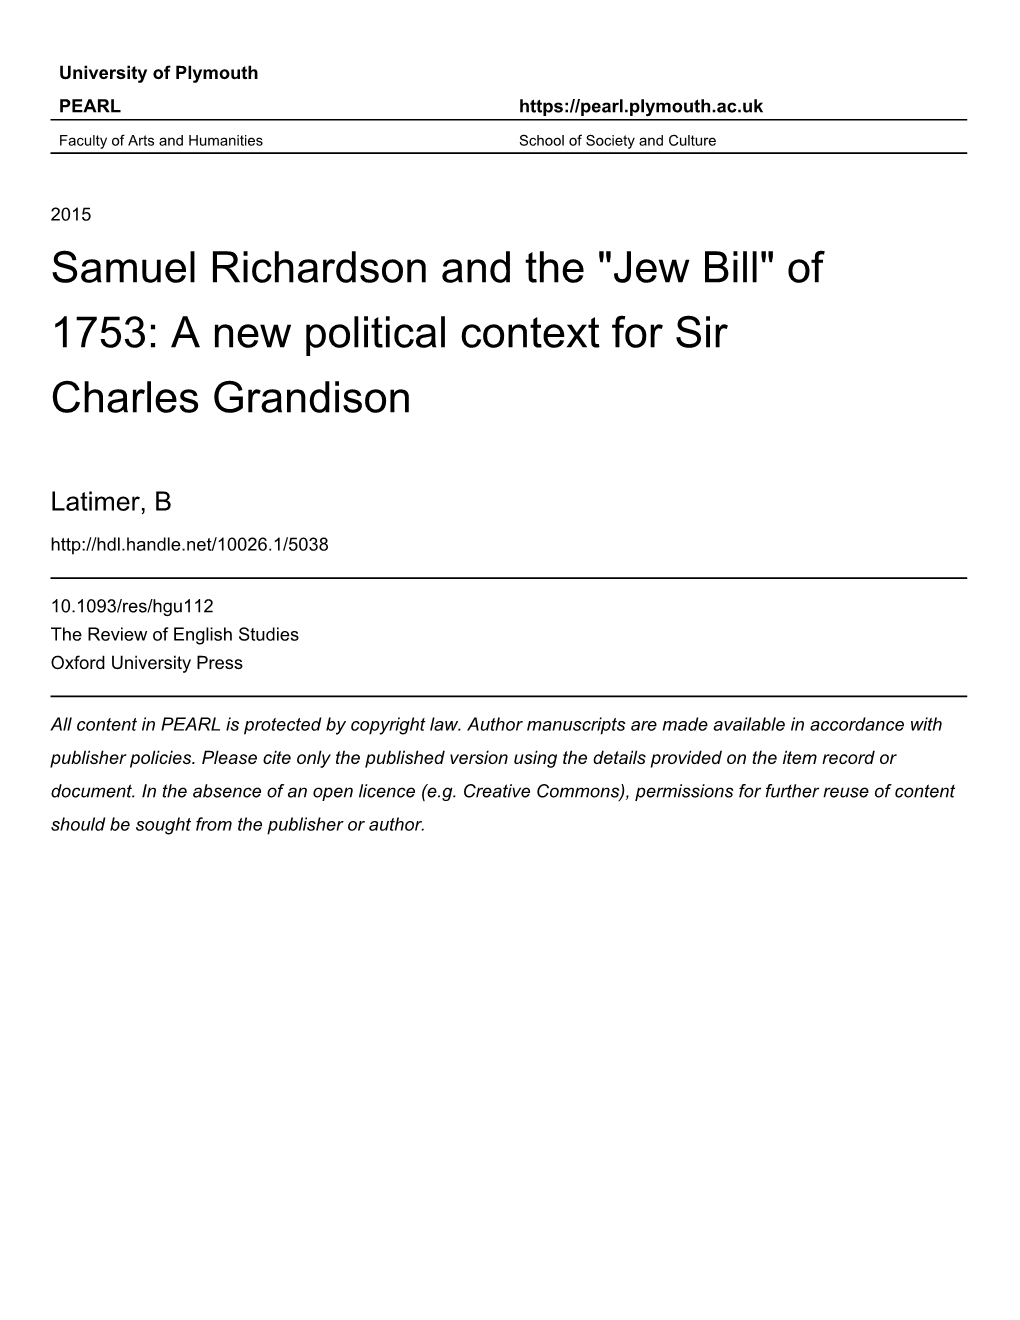 Jew Bill" of 1753: a New Political Context for Sir Charles Grandison